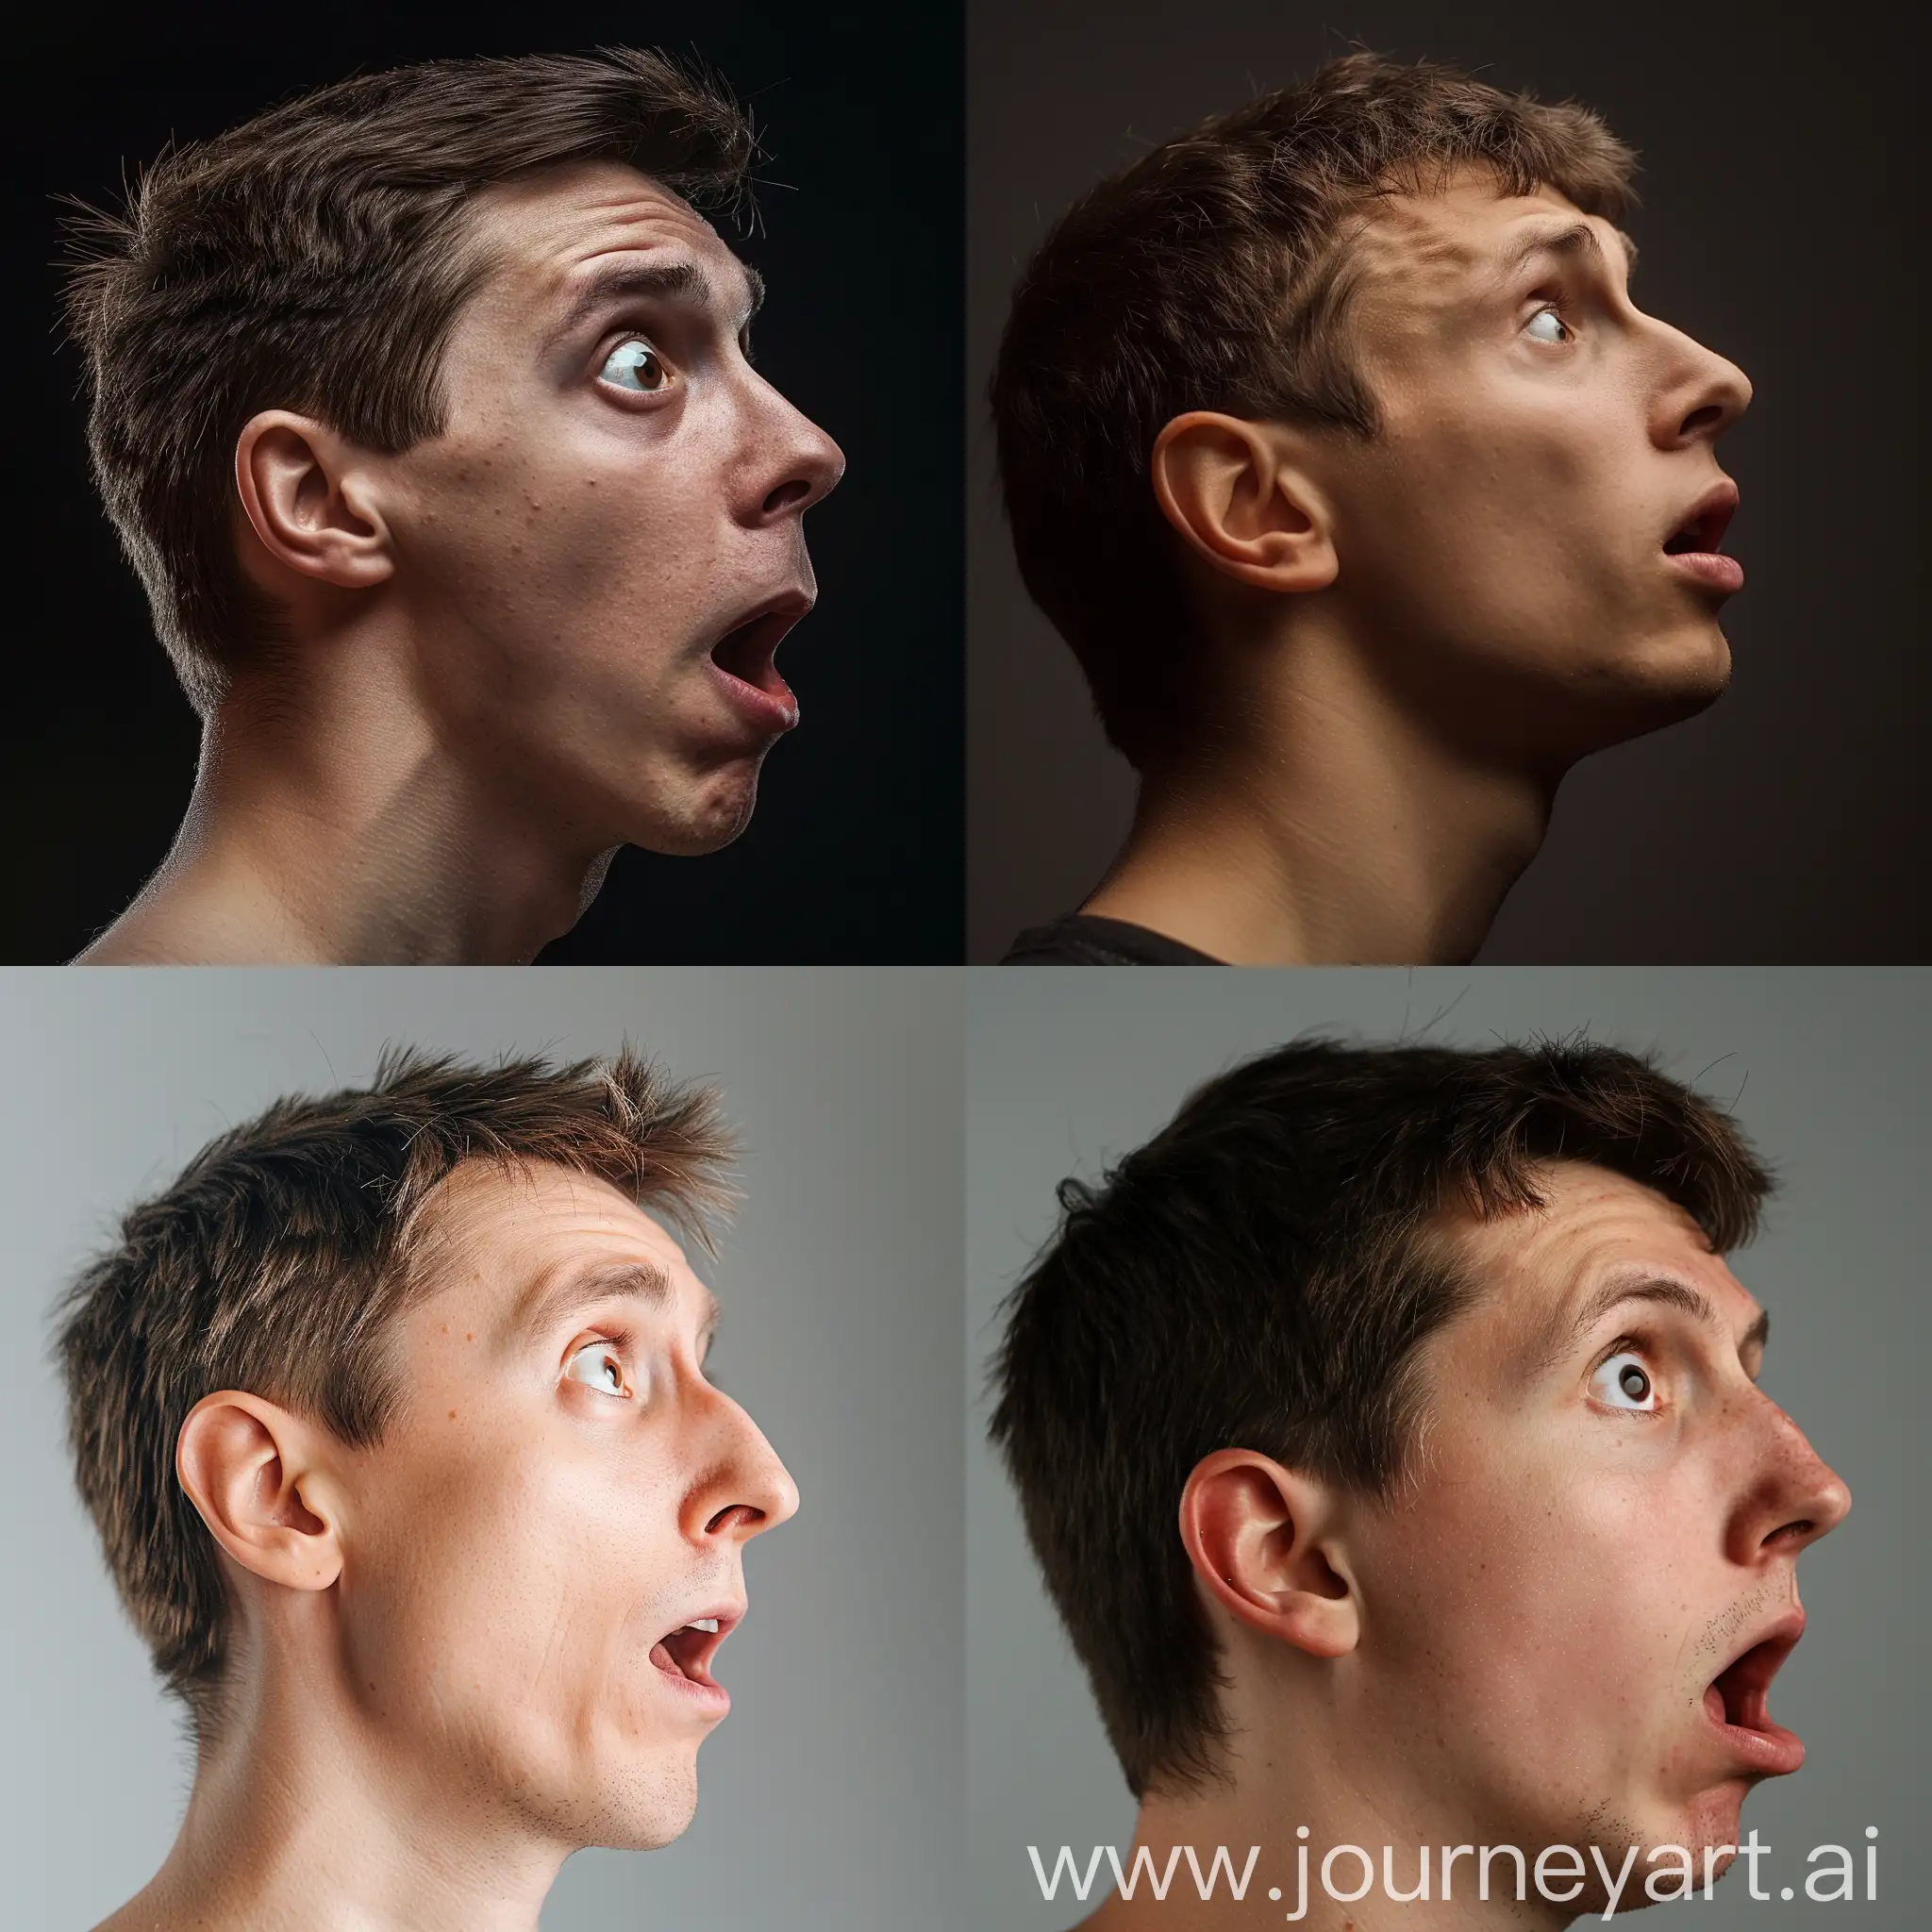 Surprised-European-Man-with-Short-Brown-Hair-in-Realistic-Photography